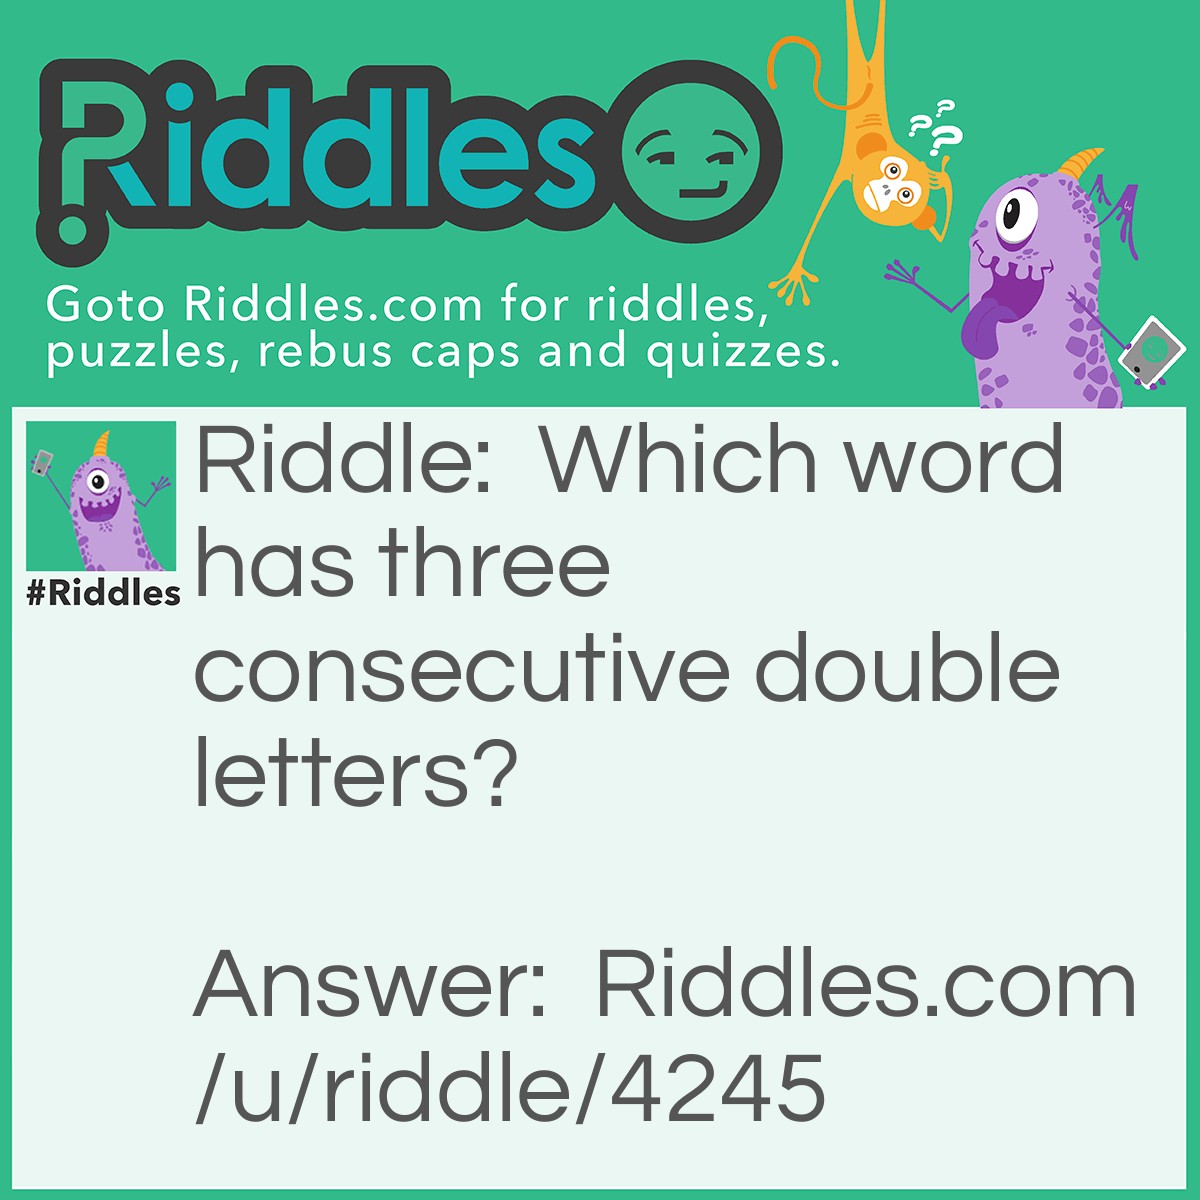 Riddle: Which word has three consecutive double letters? Answer: Bookkeeper.